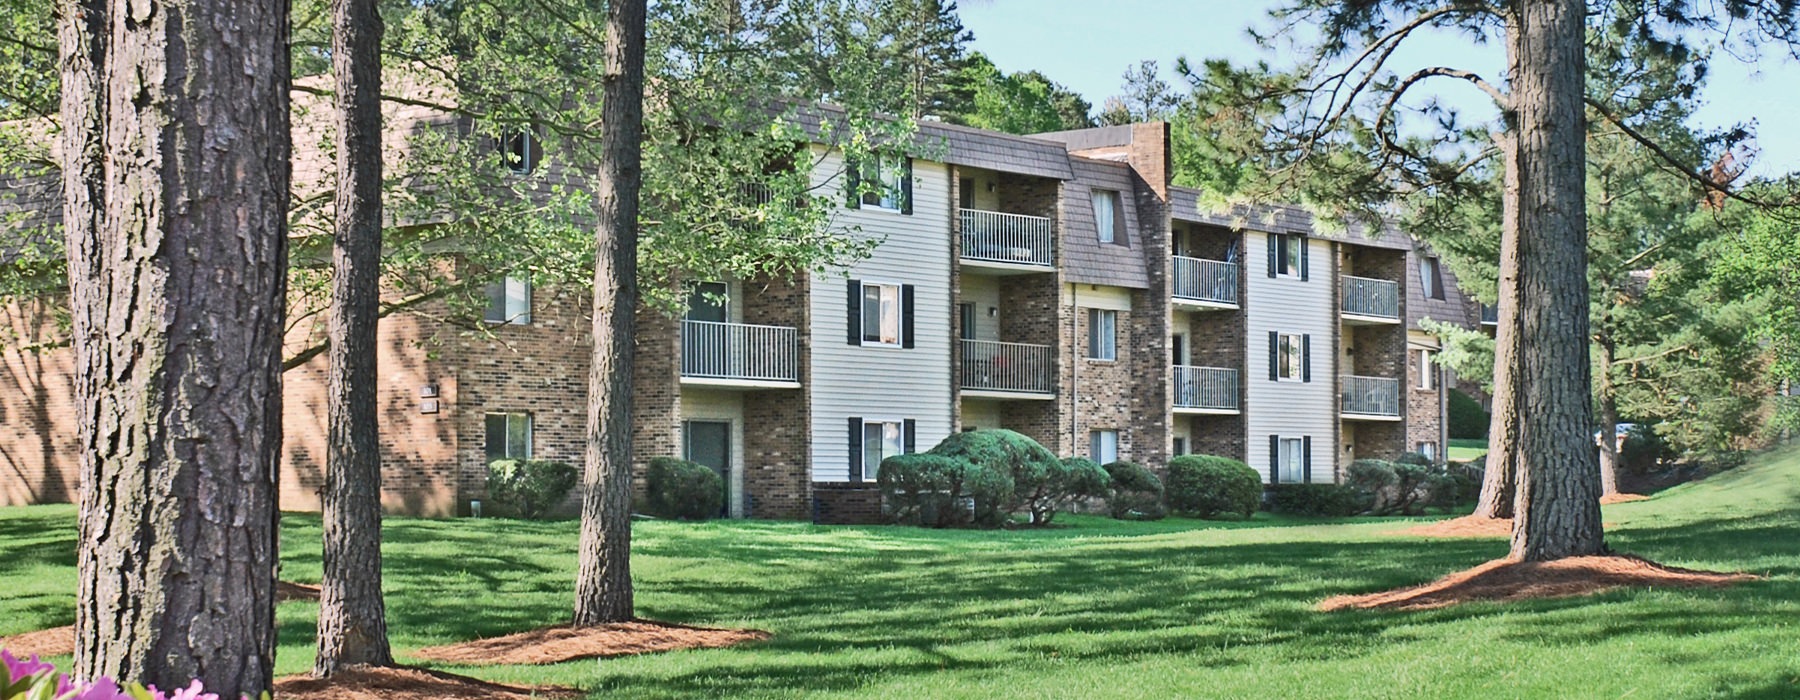 PineGate is a three-story apartment complex